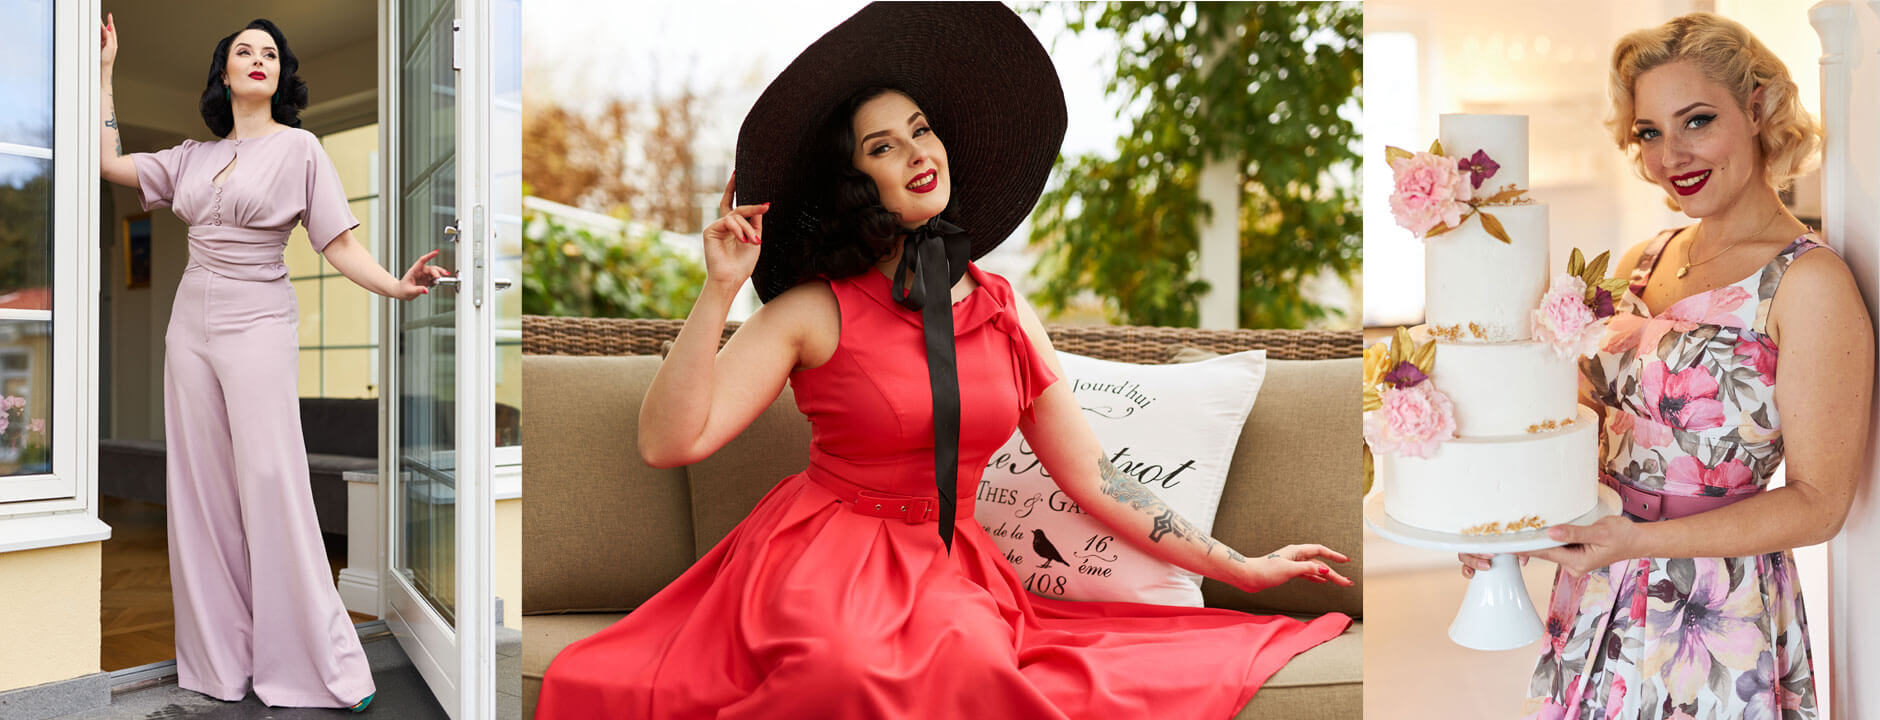 Ongebruikt Succubus, The online boutique for dresses, rockabilly and 50's QL-16